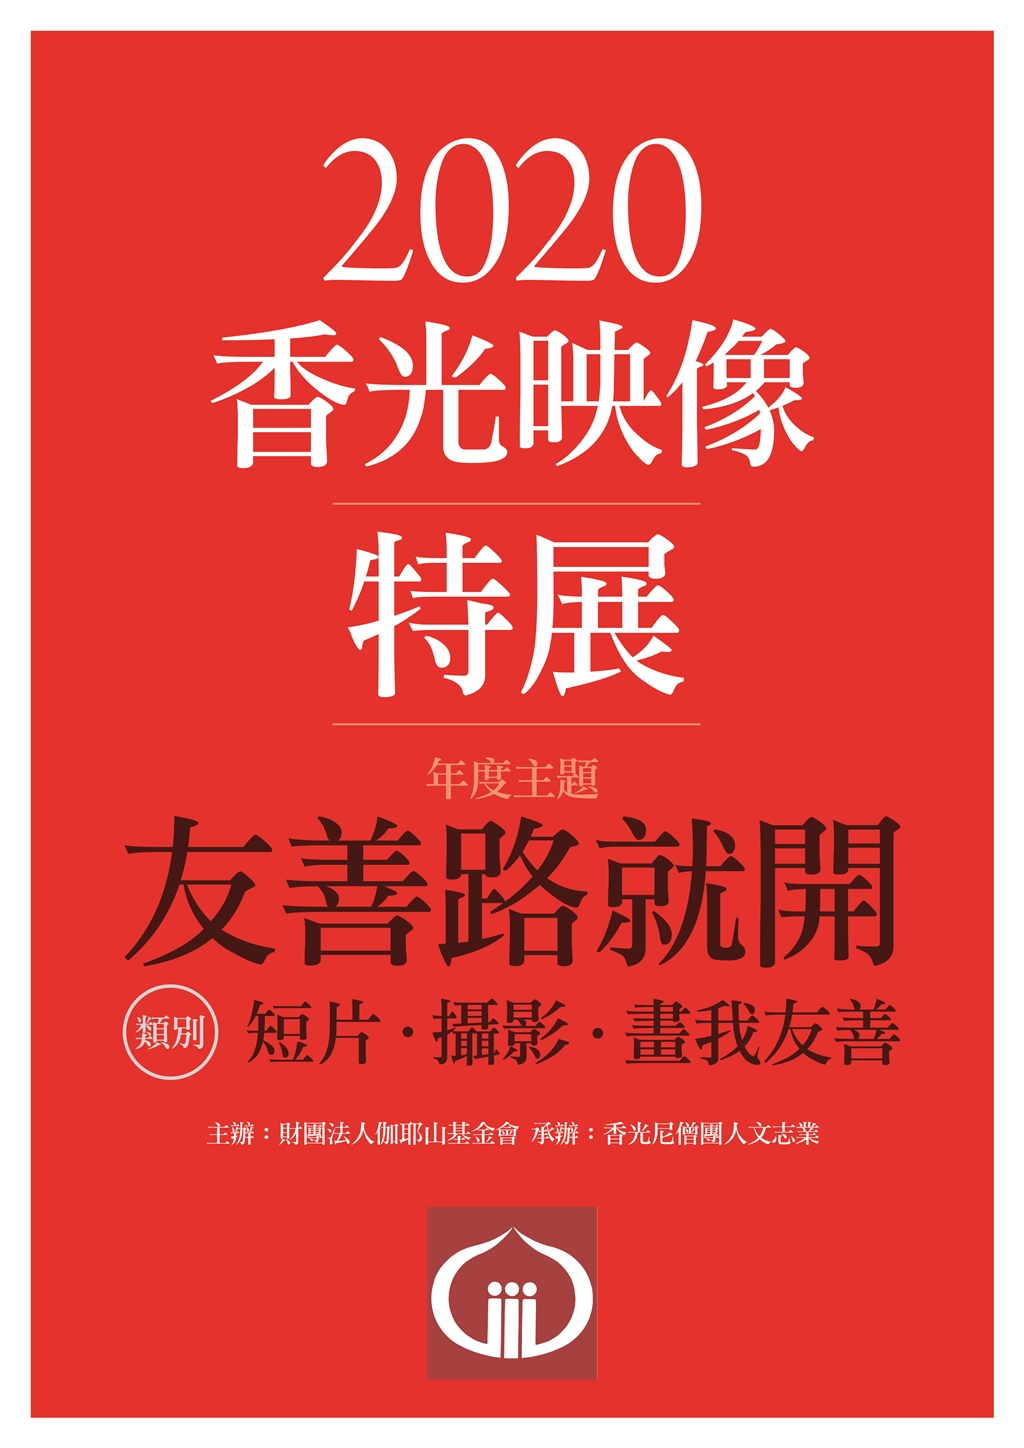 2020friendly-poster